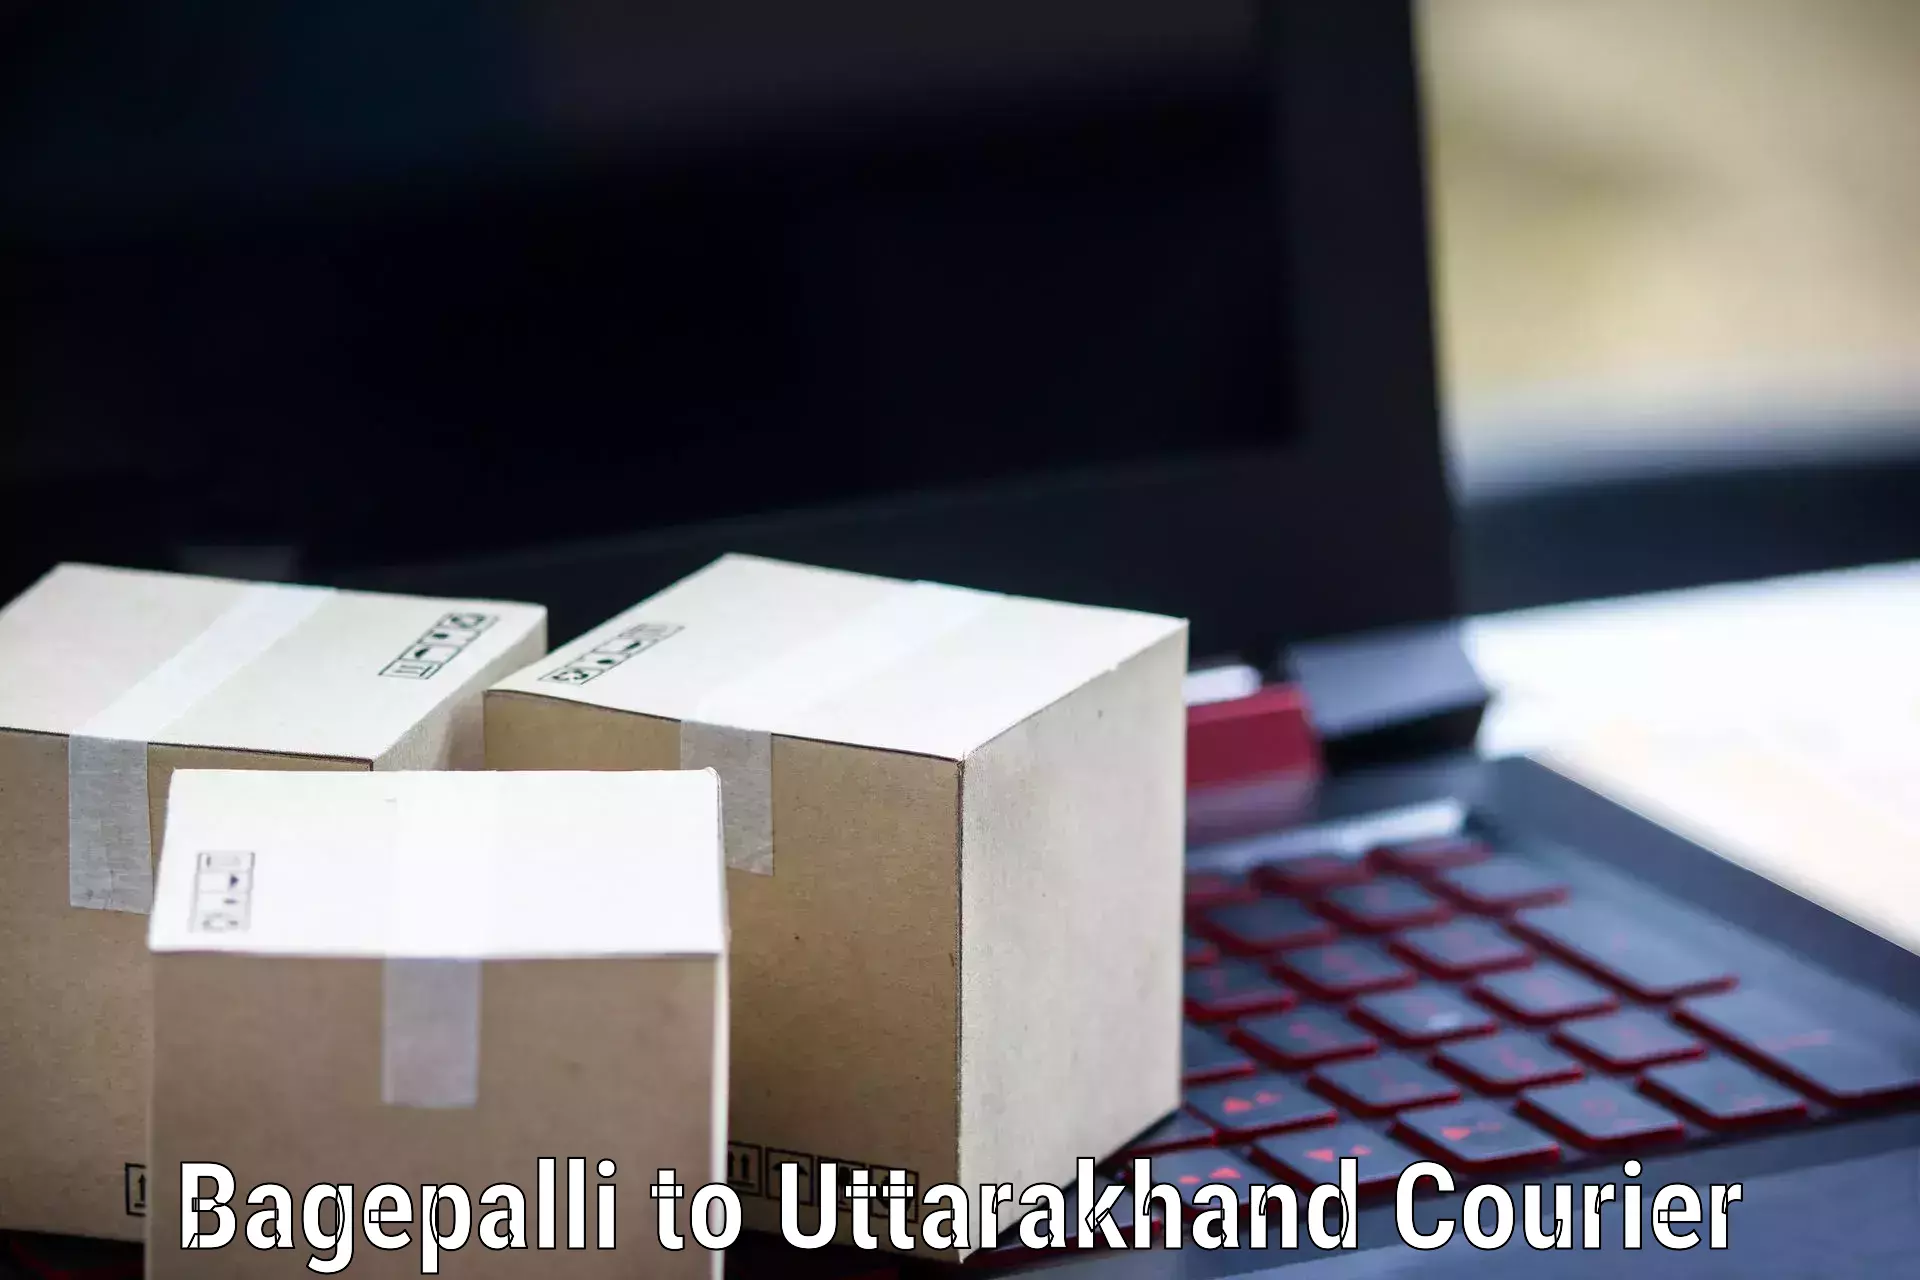 Express delivery capabilities Bagepalli to Bhagwanpur